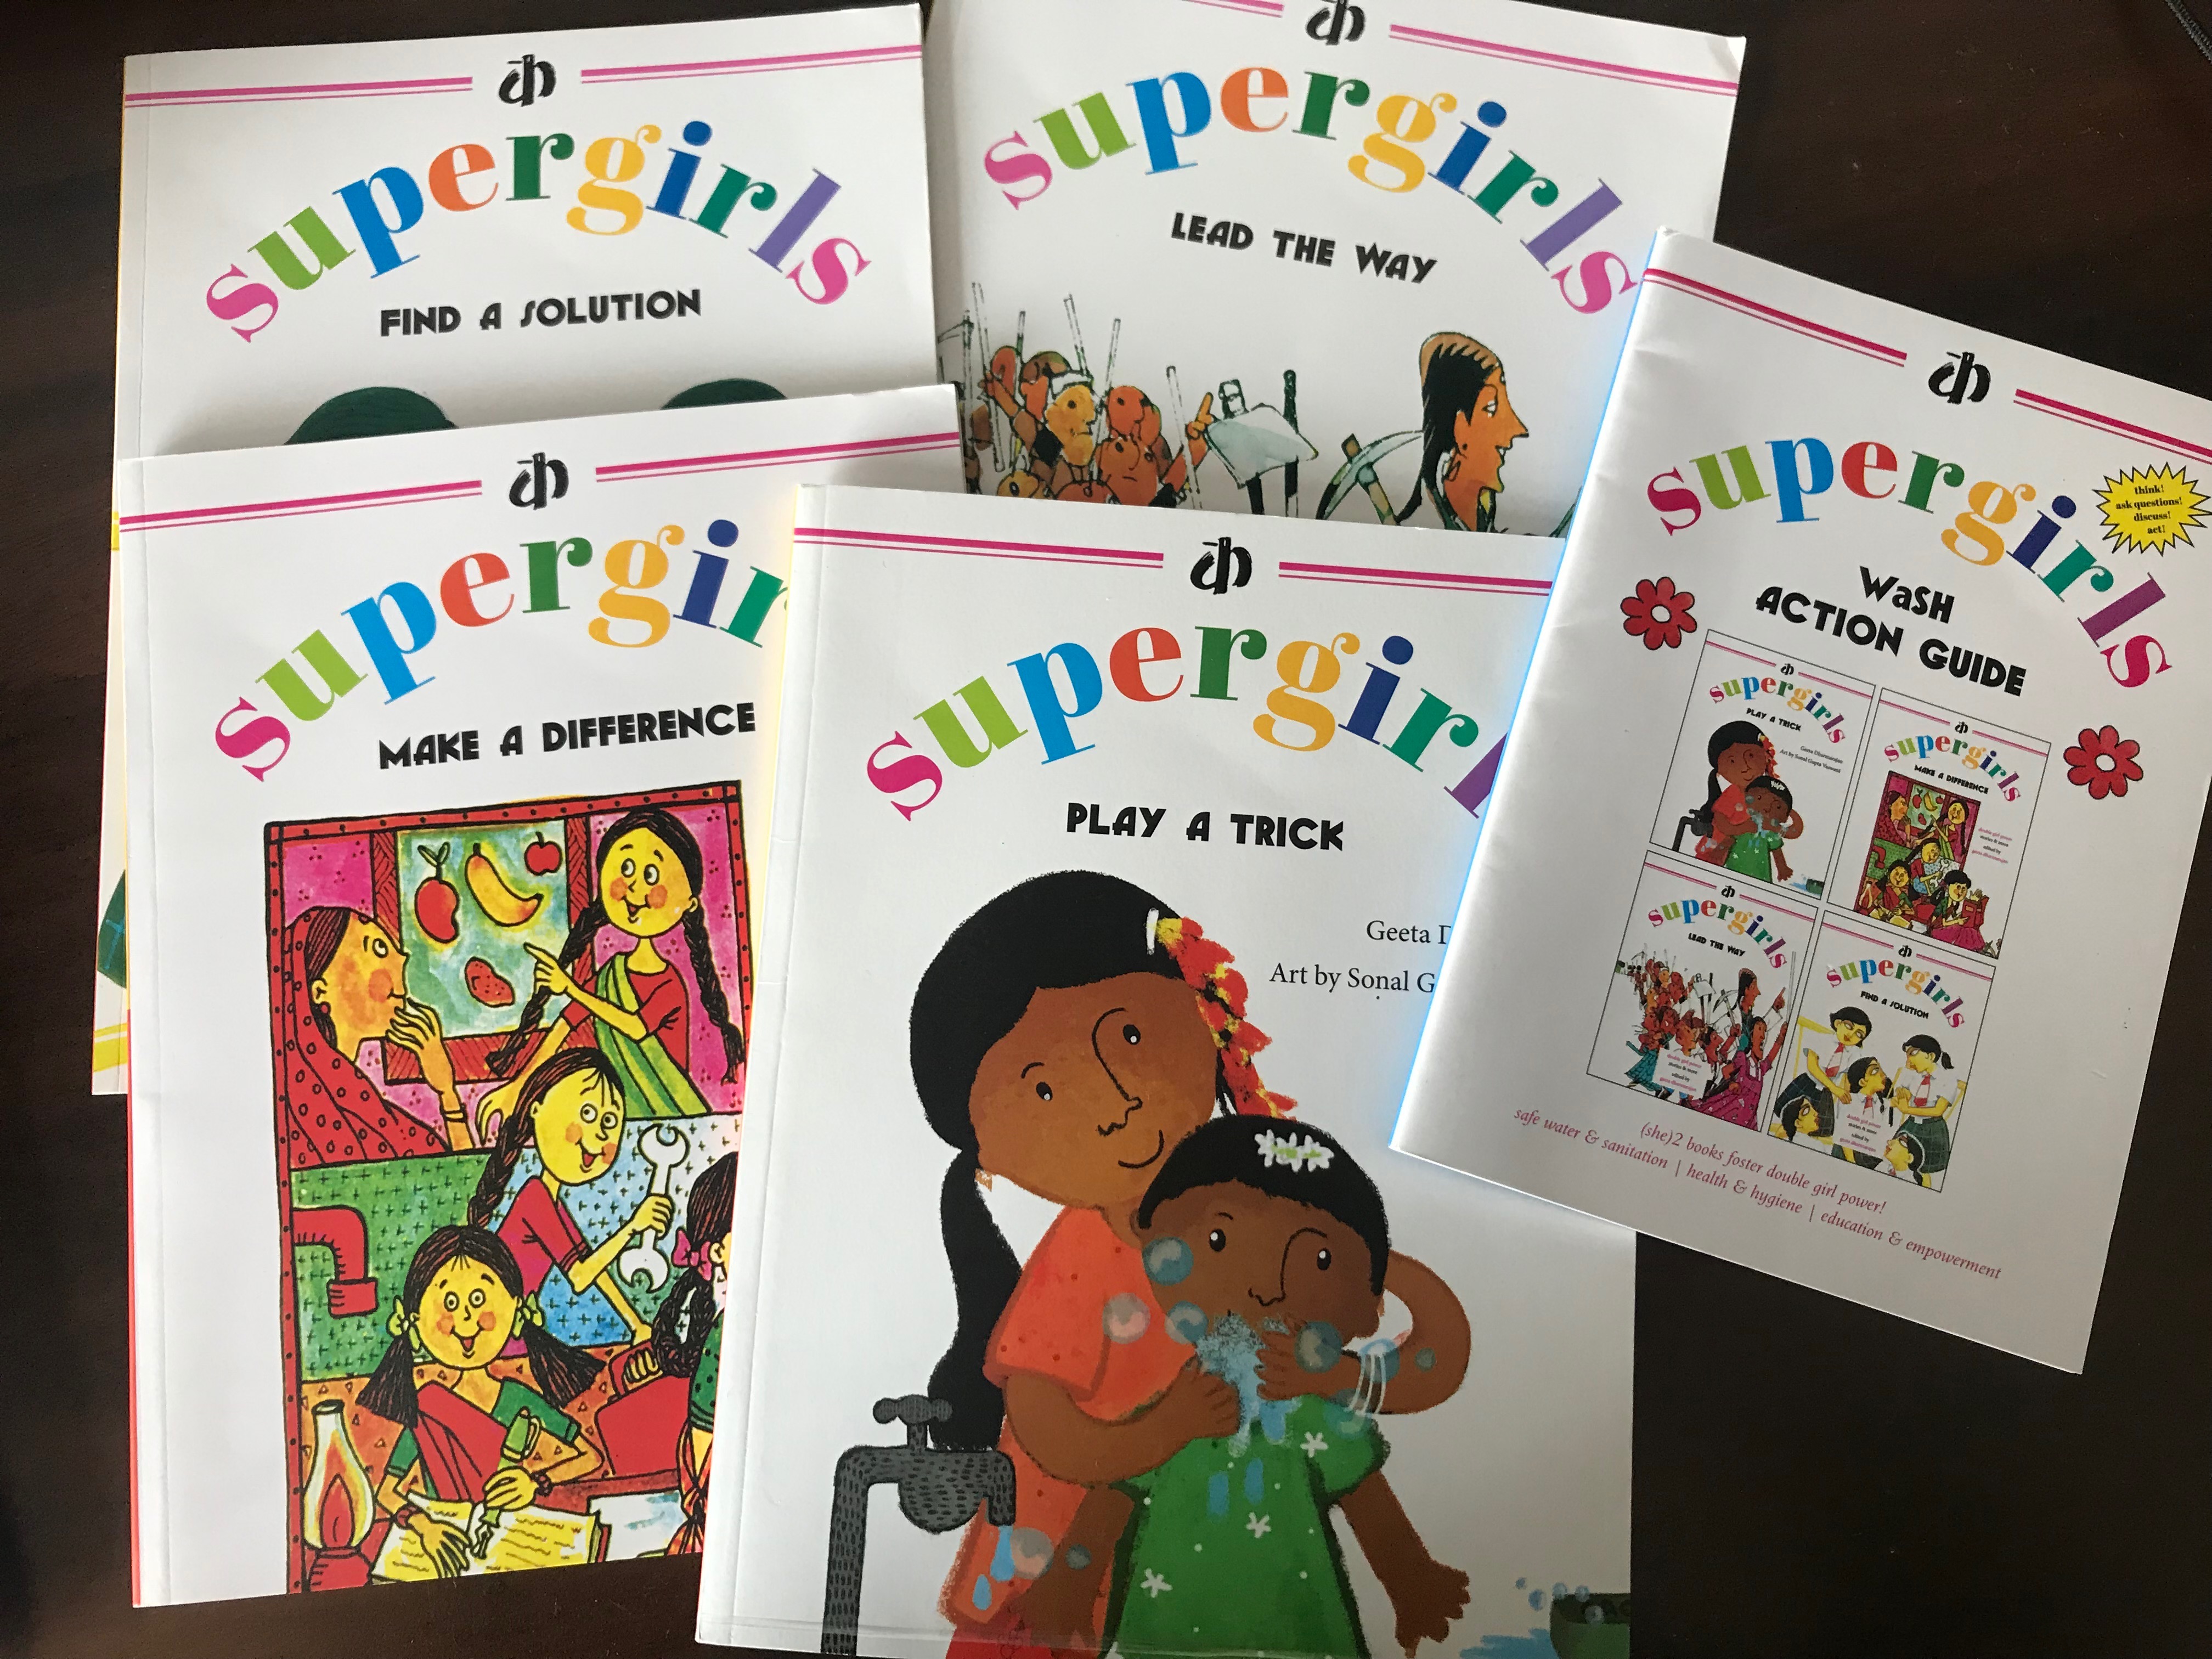 You are currently viewing The Supergirls Series by Katha shows how books play a pivotal role in effecting change.